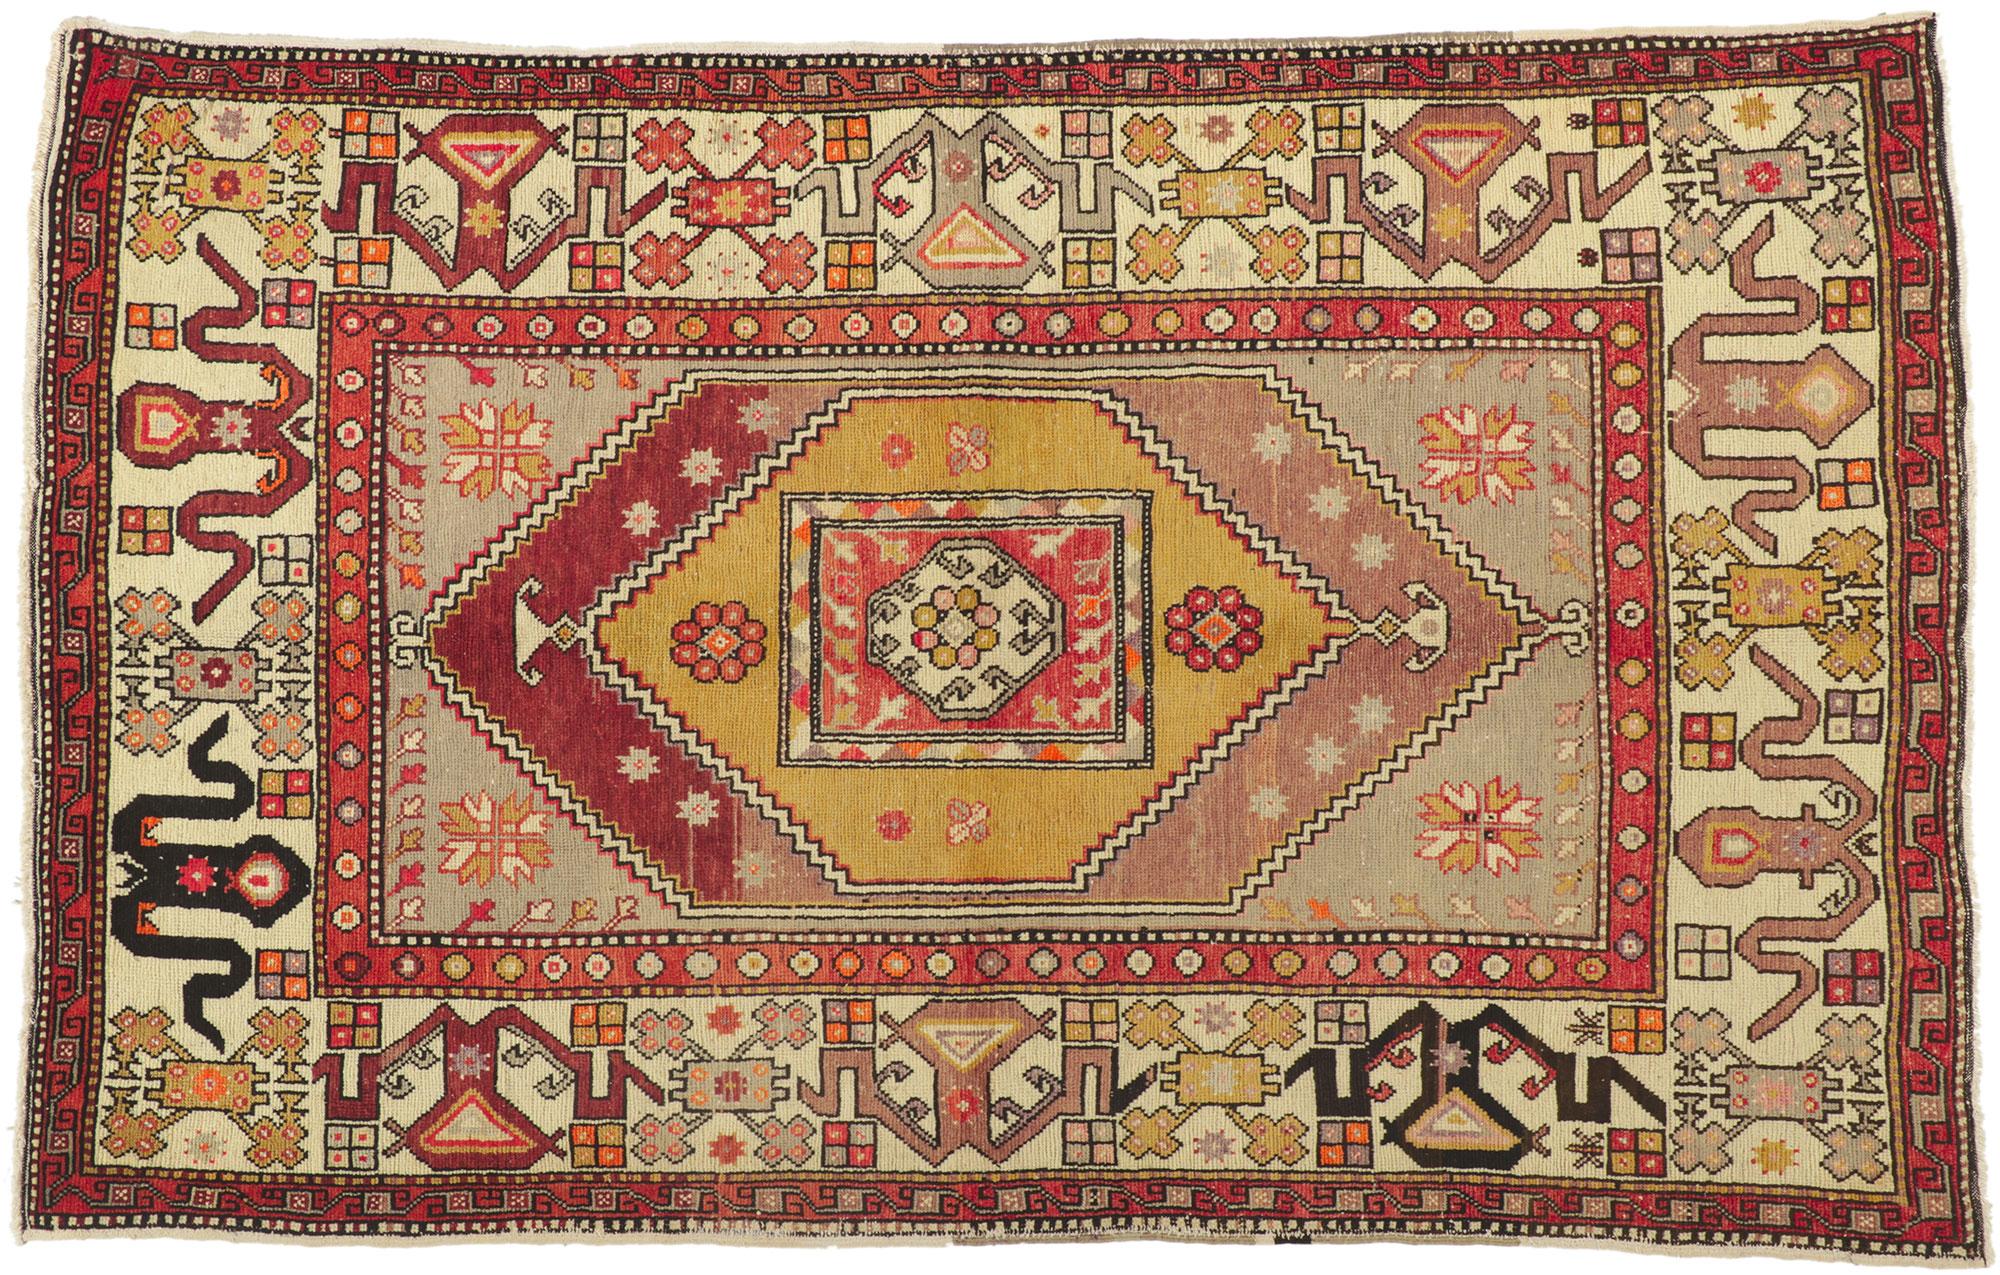 50328 Vintage Turkish Oushak rug, 05.03 X 08.05.
Showcasing a bold expressive design, incredible detail and texture, this hand knitted wool vintage Turkish Oushak rug is a captivating vision of woven beauty. The eye-catching medallion design and